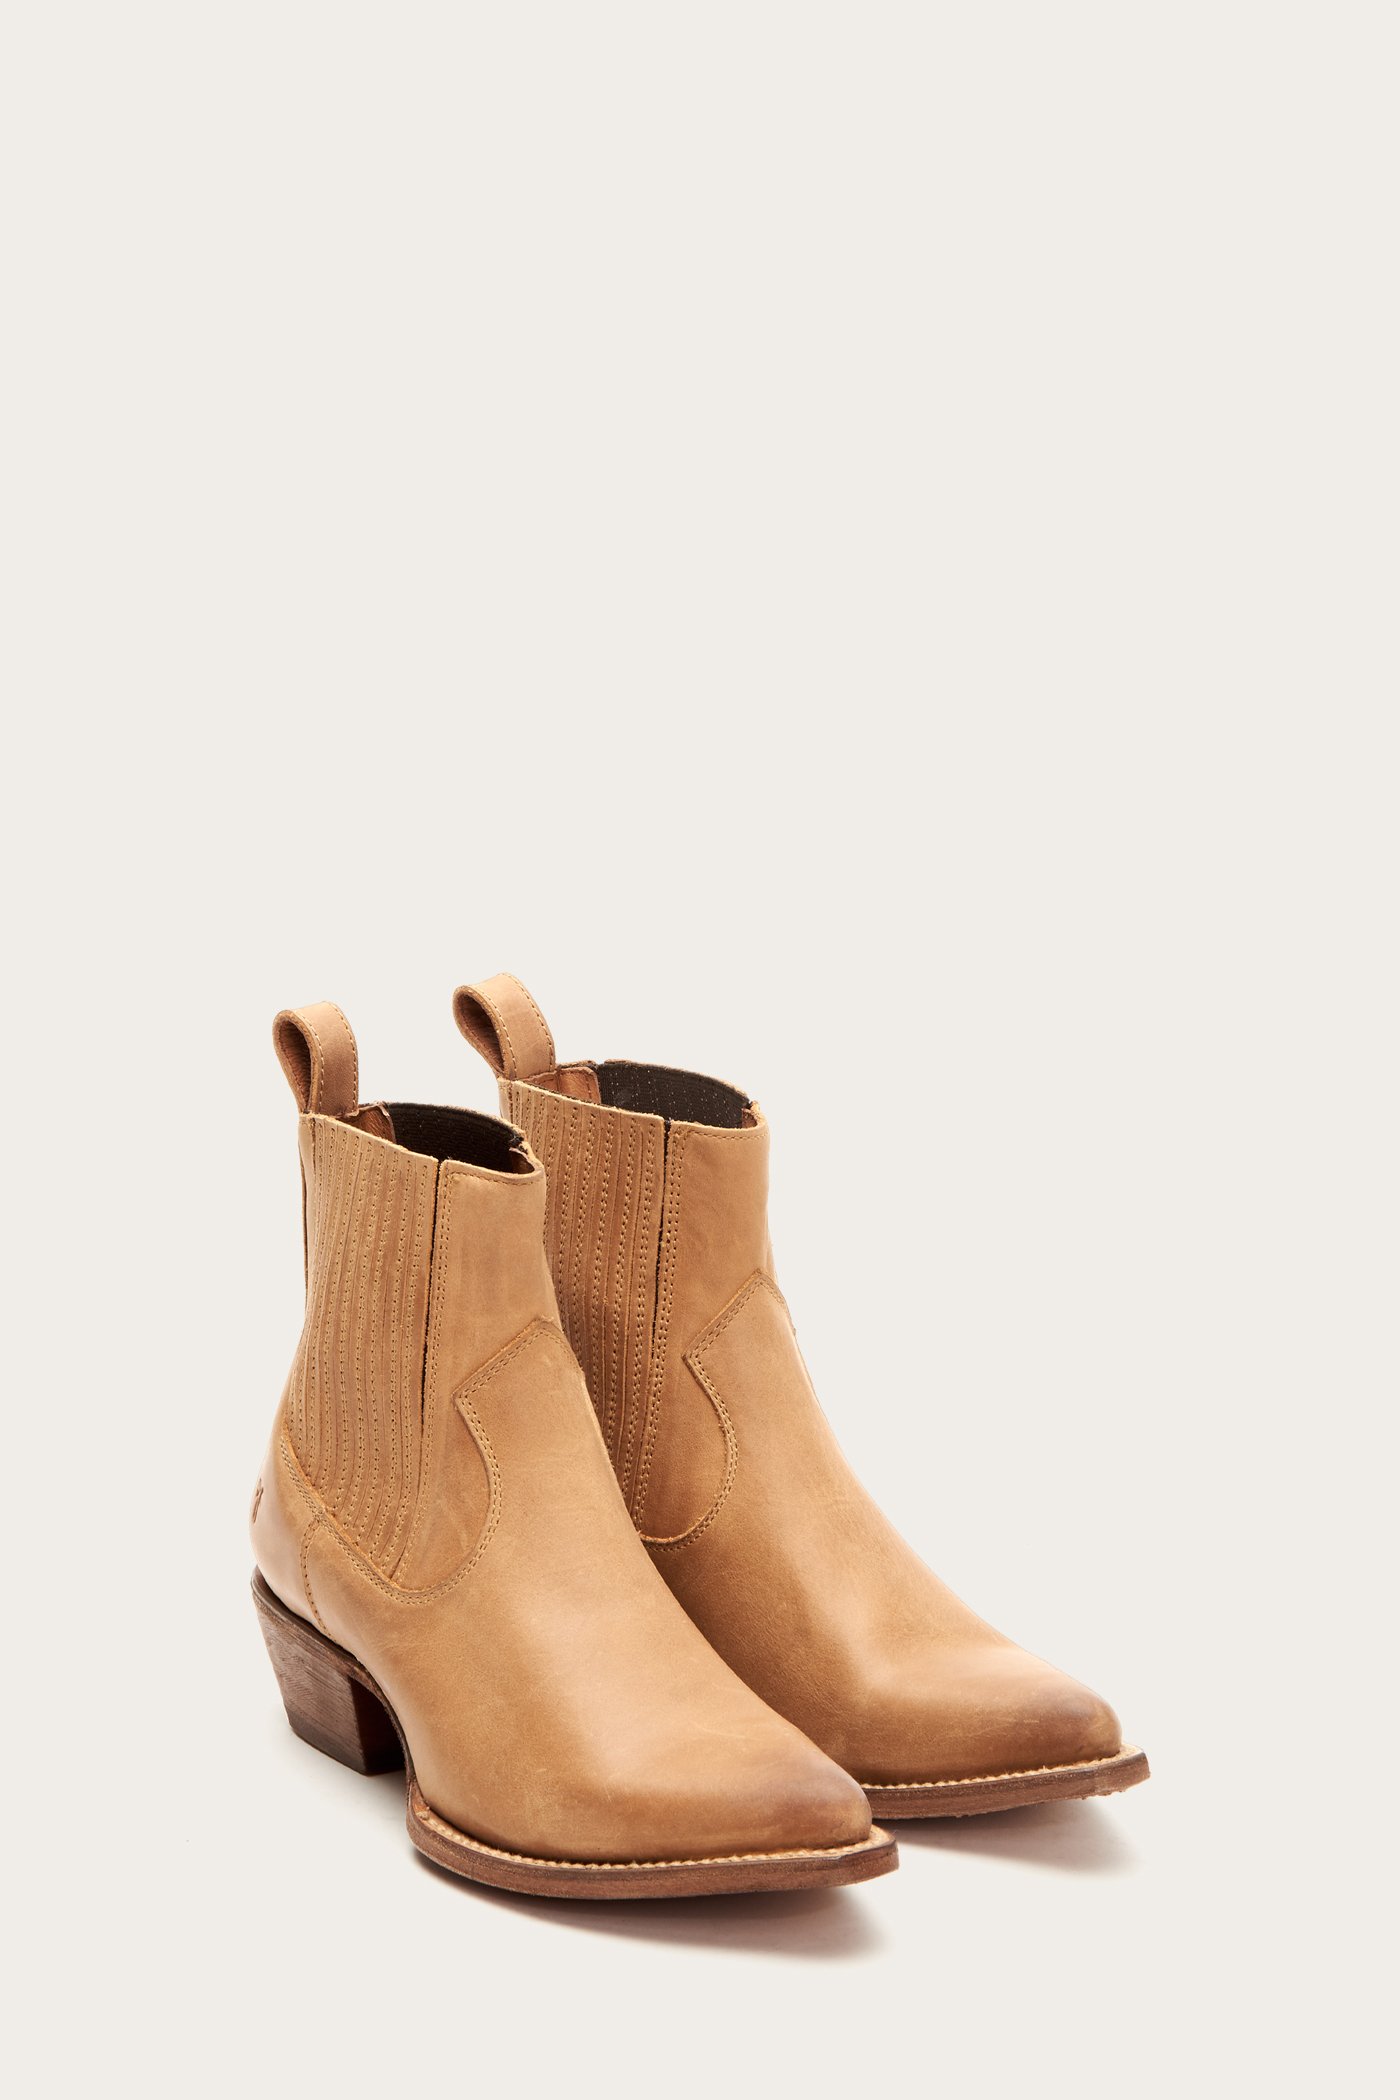 Tan leather Western inspired booties for fall